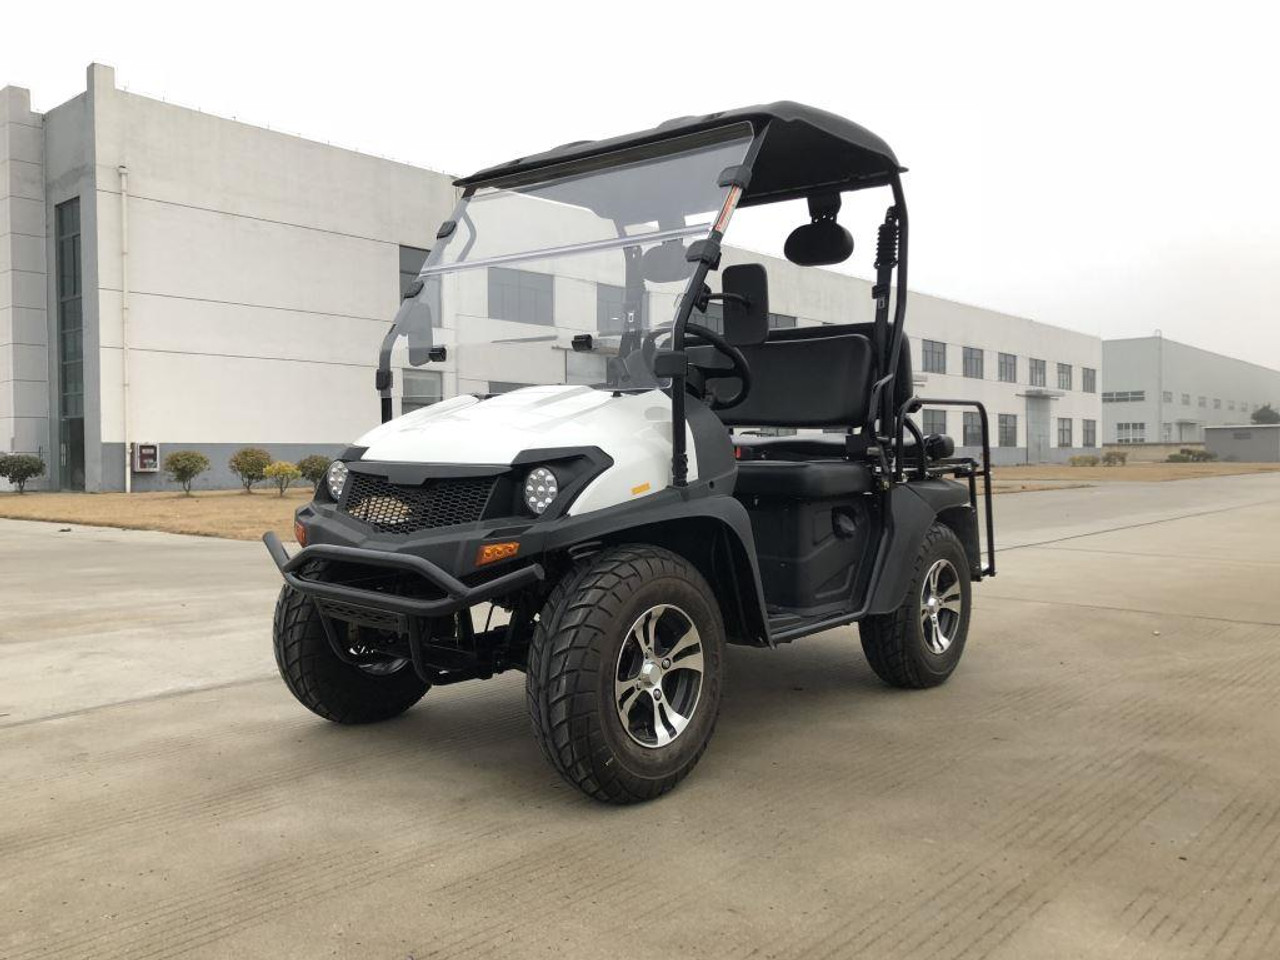 Trailmaster Taurus 200 MFV (Side By Side/UTV) 4-Stroke, Single Cylinder, Air And Oil Cooled White